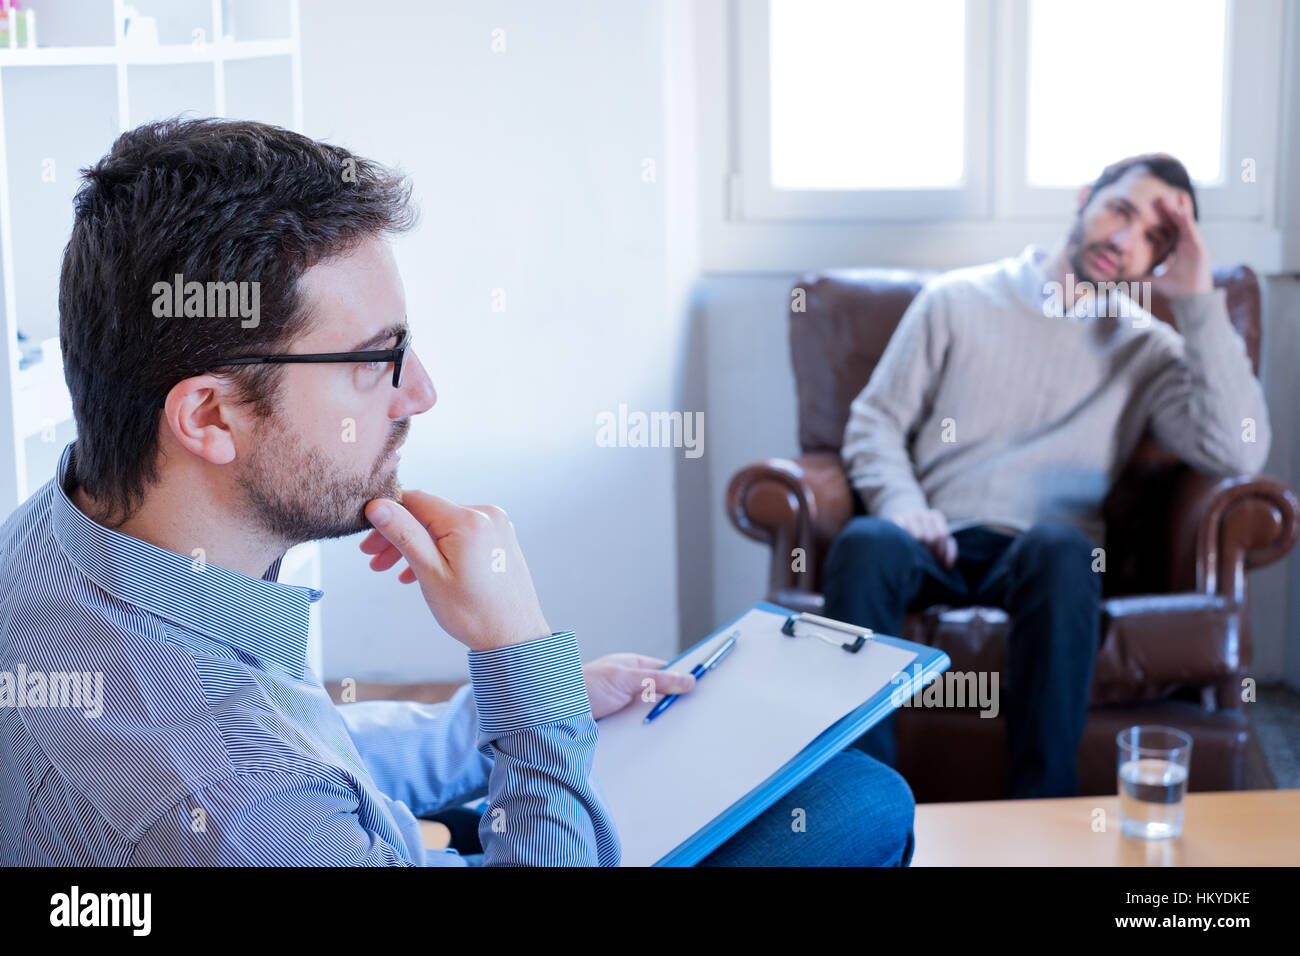 Psychologist taking notes during psychotherapy session Stock Photo